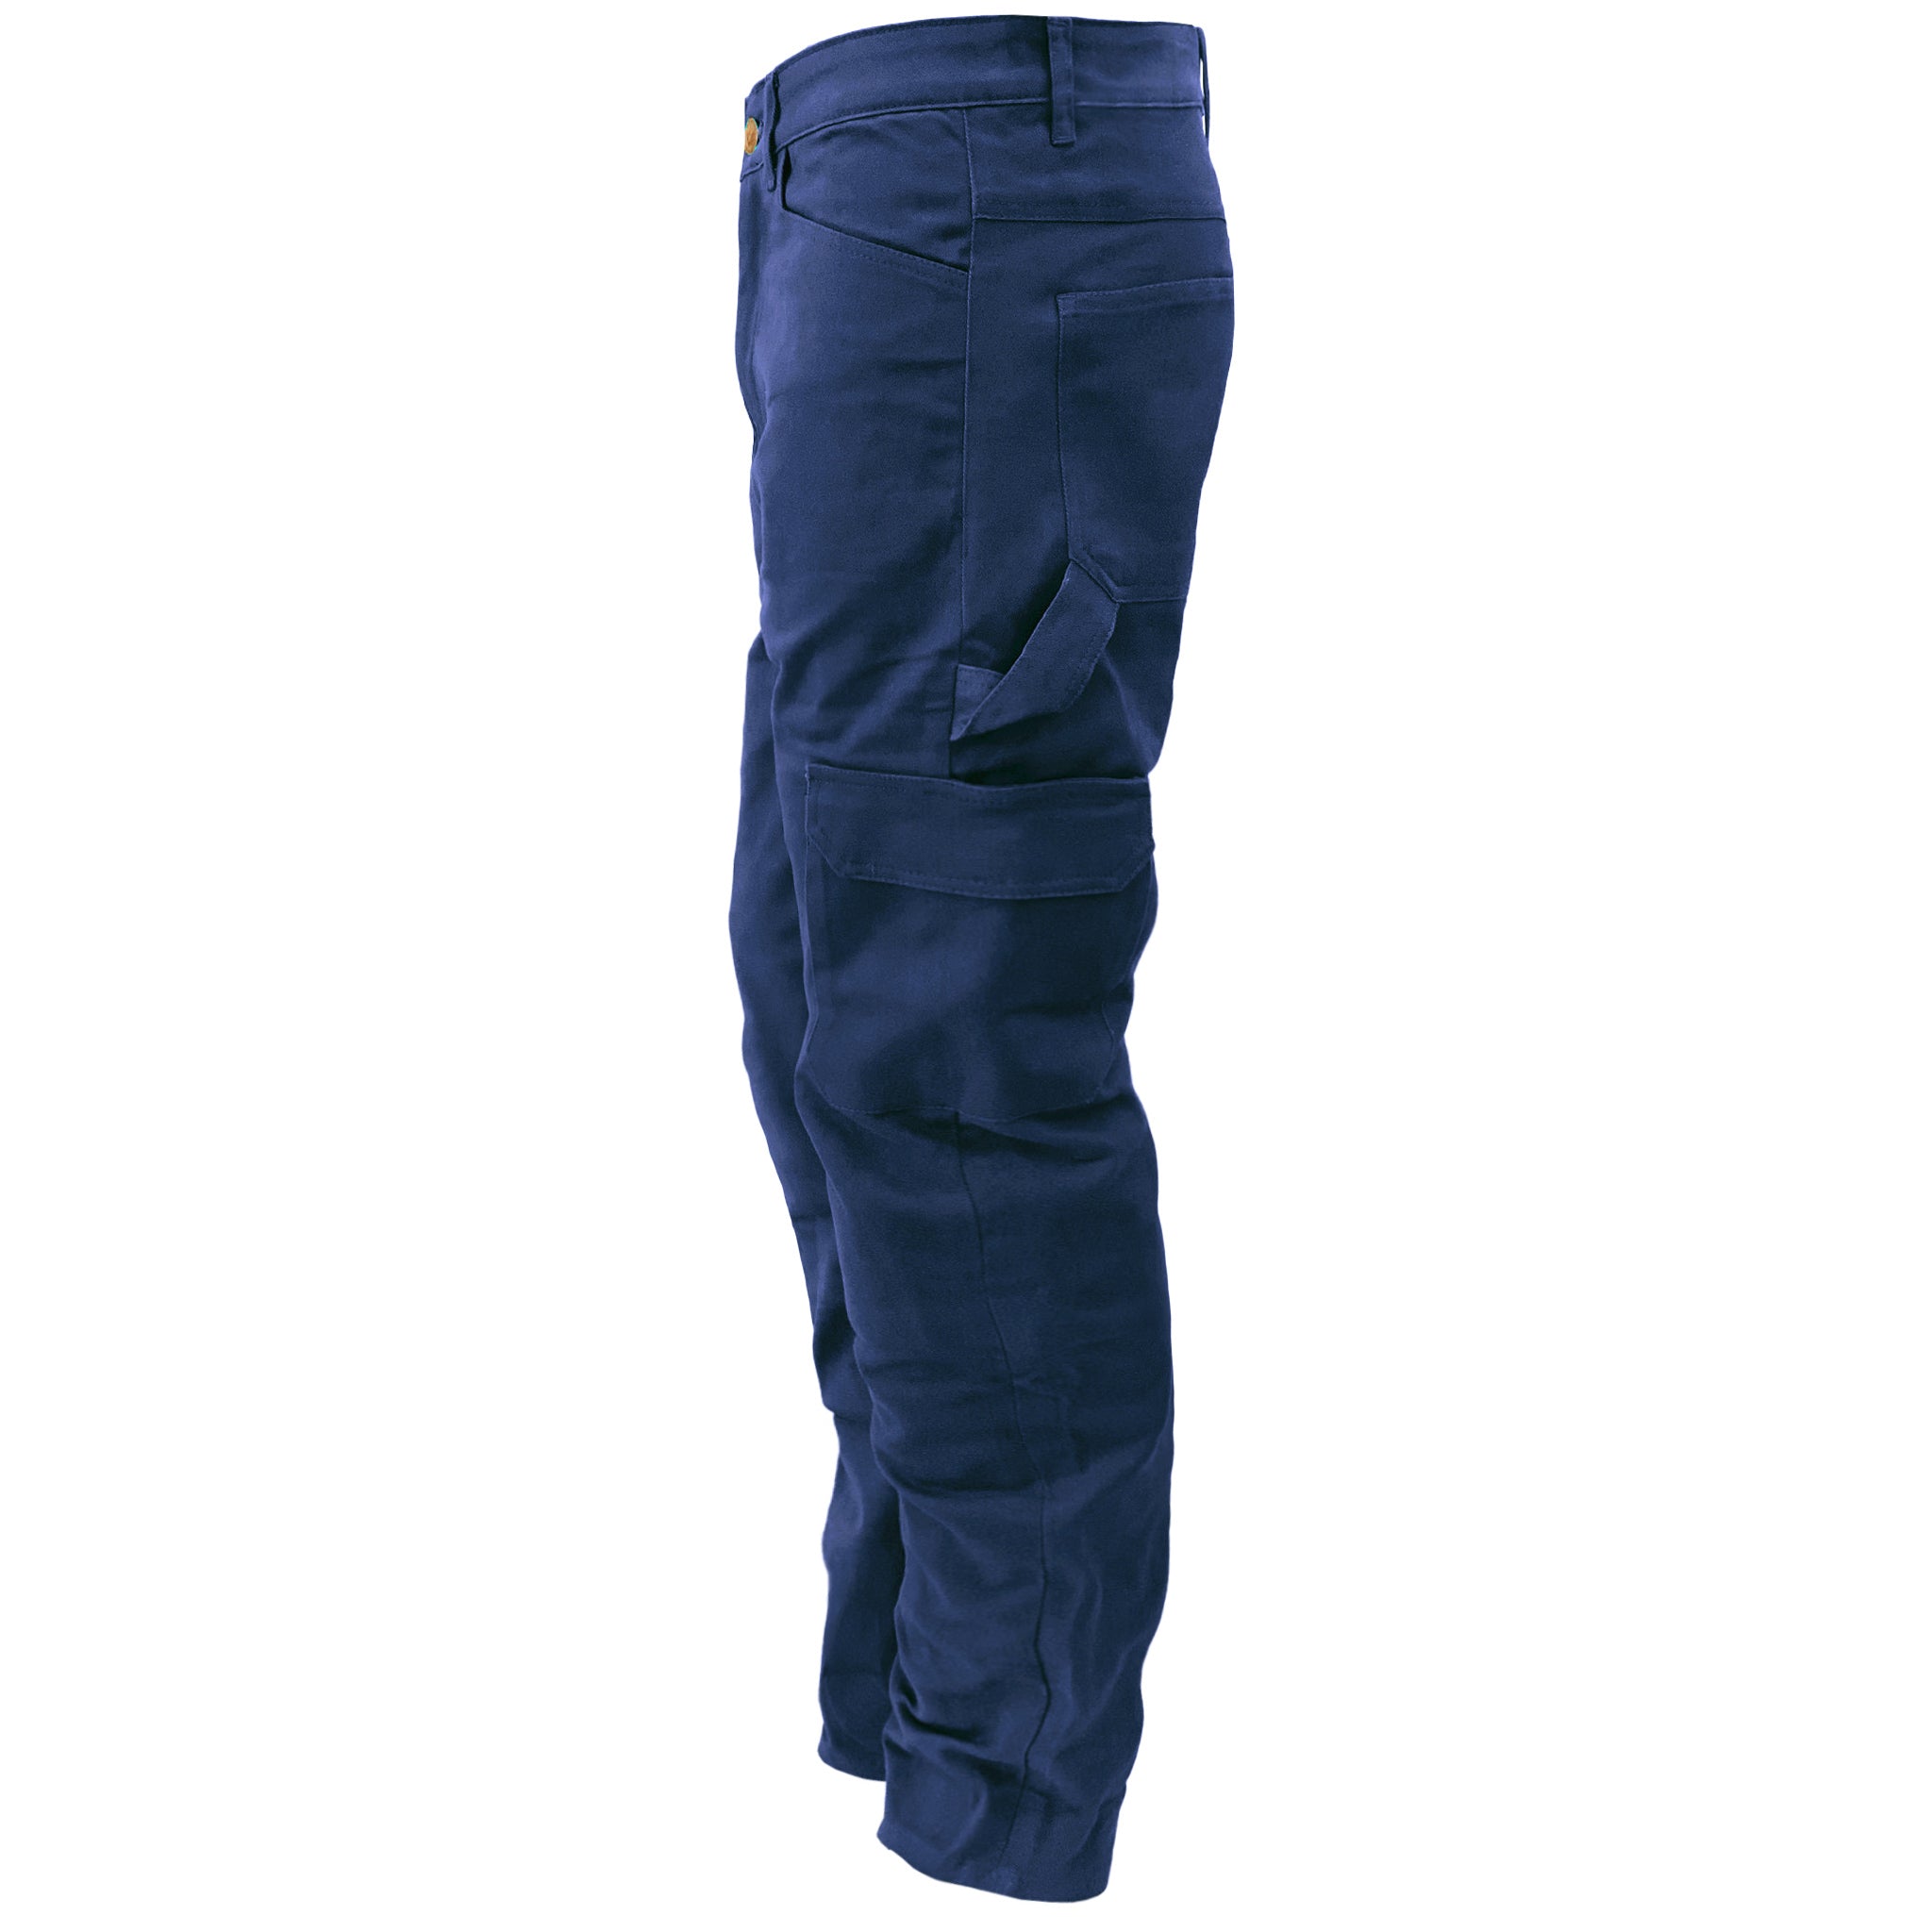 Loose Fit Cargo Pants - Navy Blue with Pads